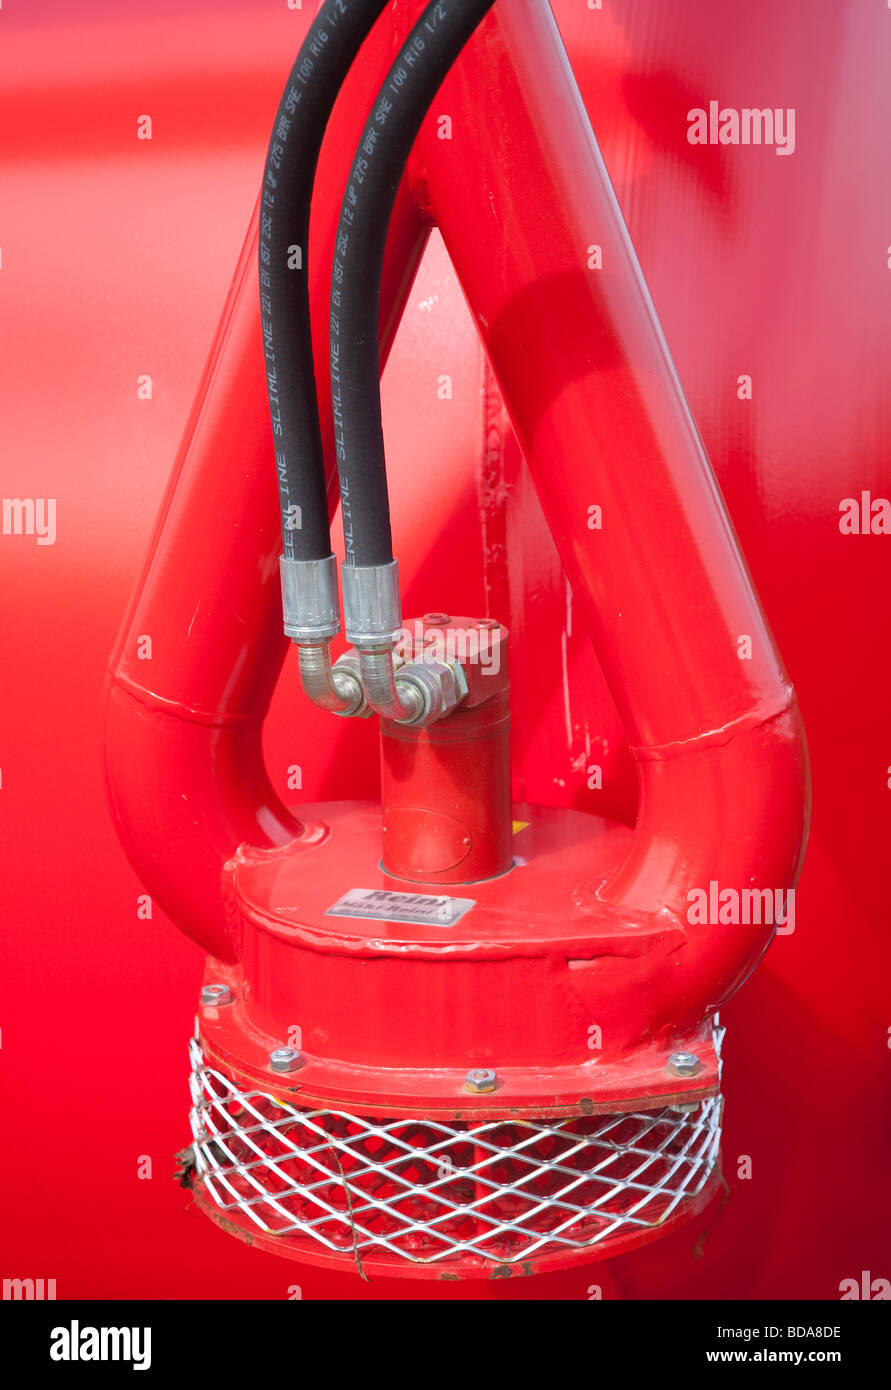 Shielded water intake of a high pressure fire suppressing water suction pump powered by hydraulics Stock Photo